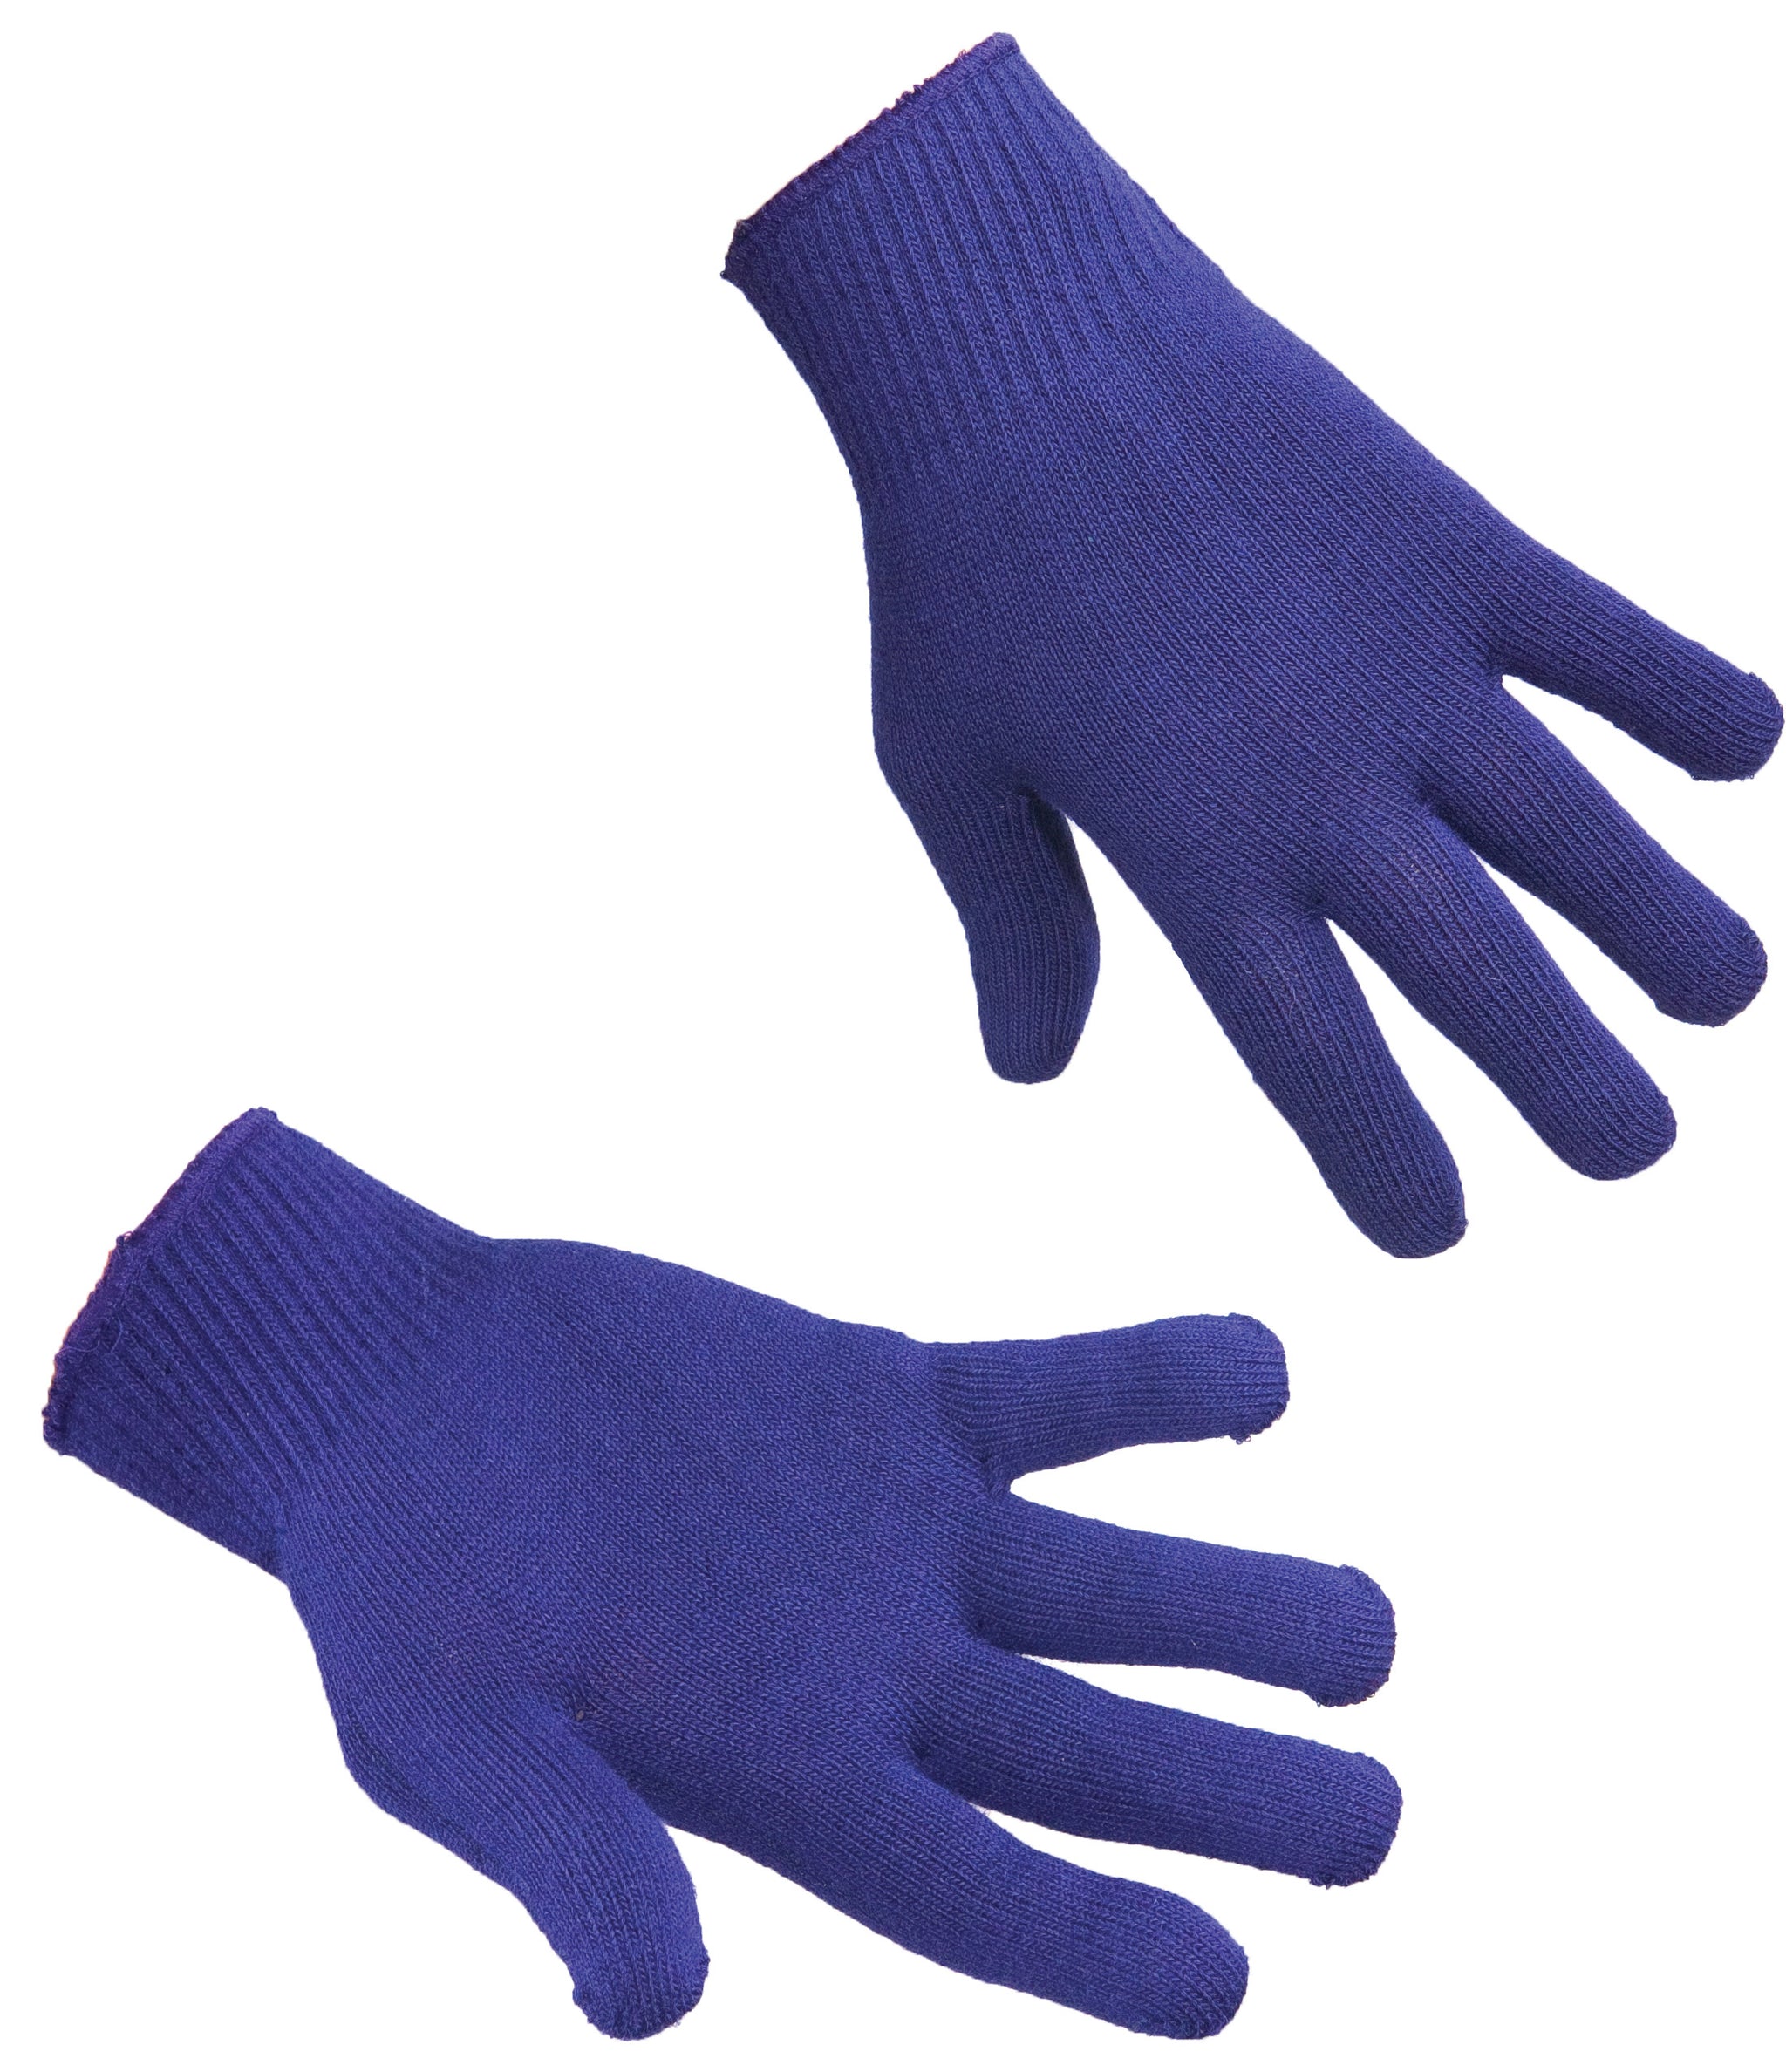 Hand Protection | Ono Work and Safety — Ono Work & Safety